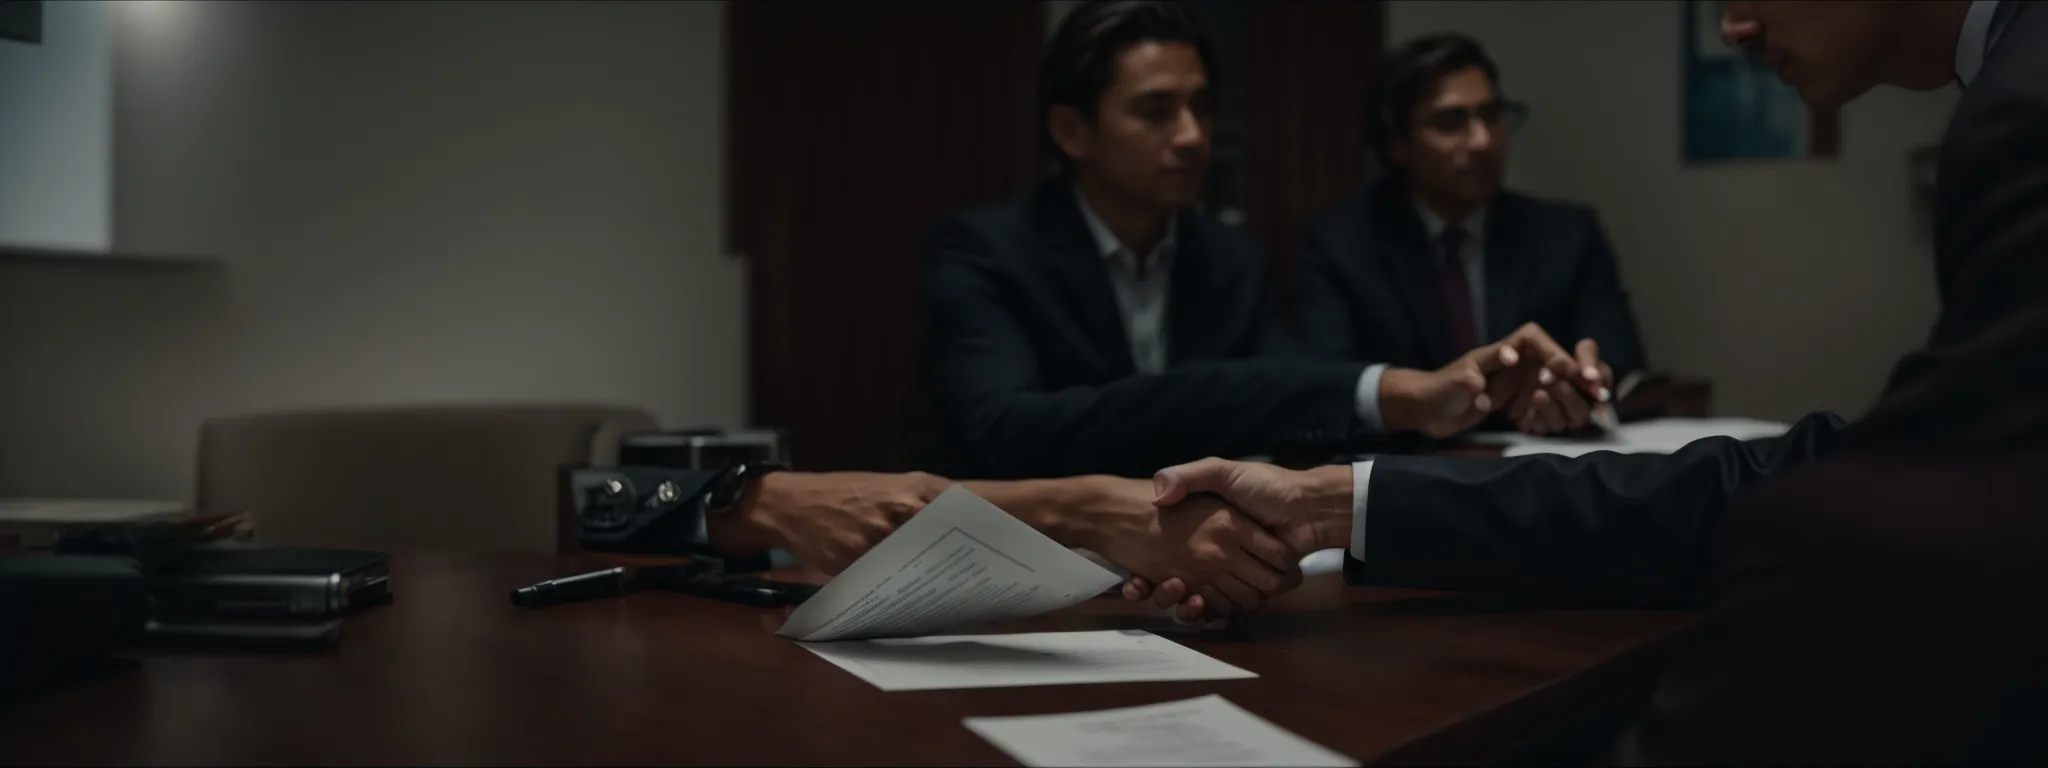 two business professionals shaking hands across a table with a legal document and a pen in between them.